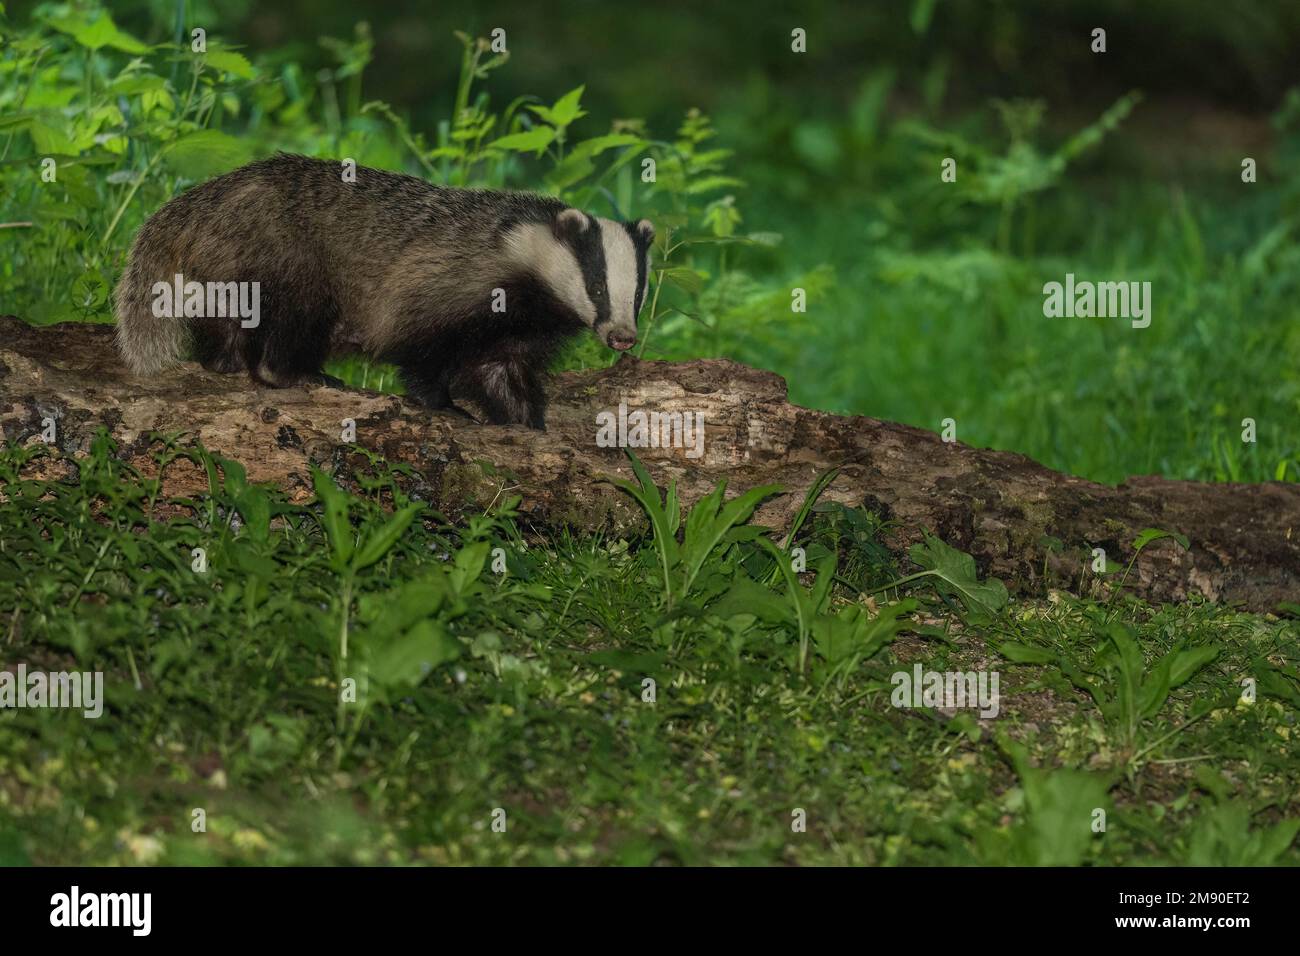 Lactating sow, Eurasian Badger (Meles meles), on a nature reserve in the Herefordshire UK countryside. May 2022 Stock Photo